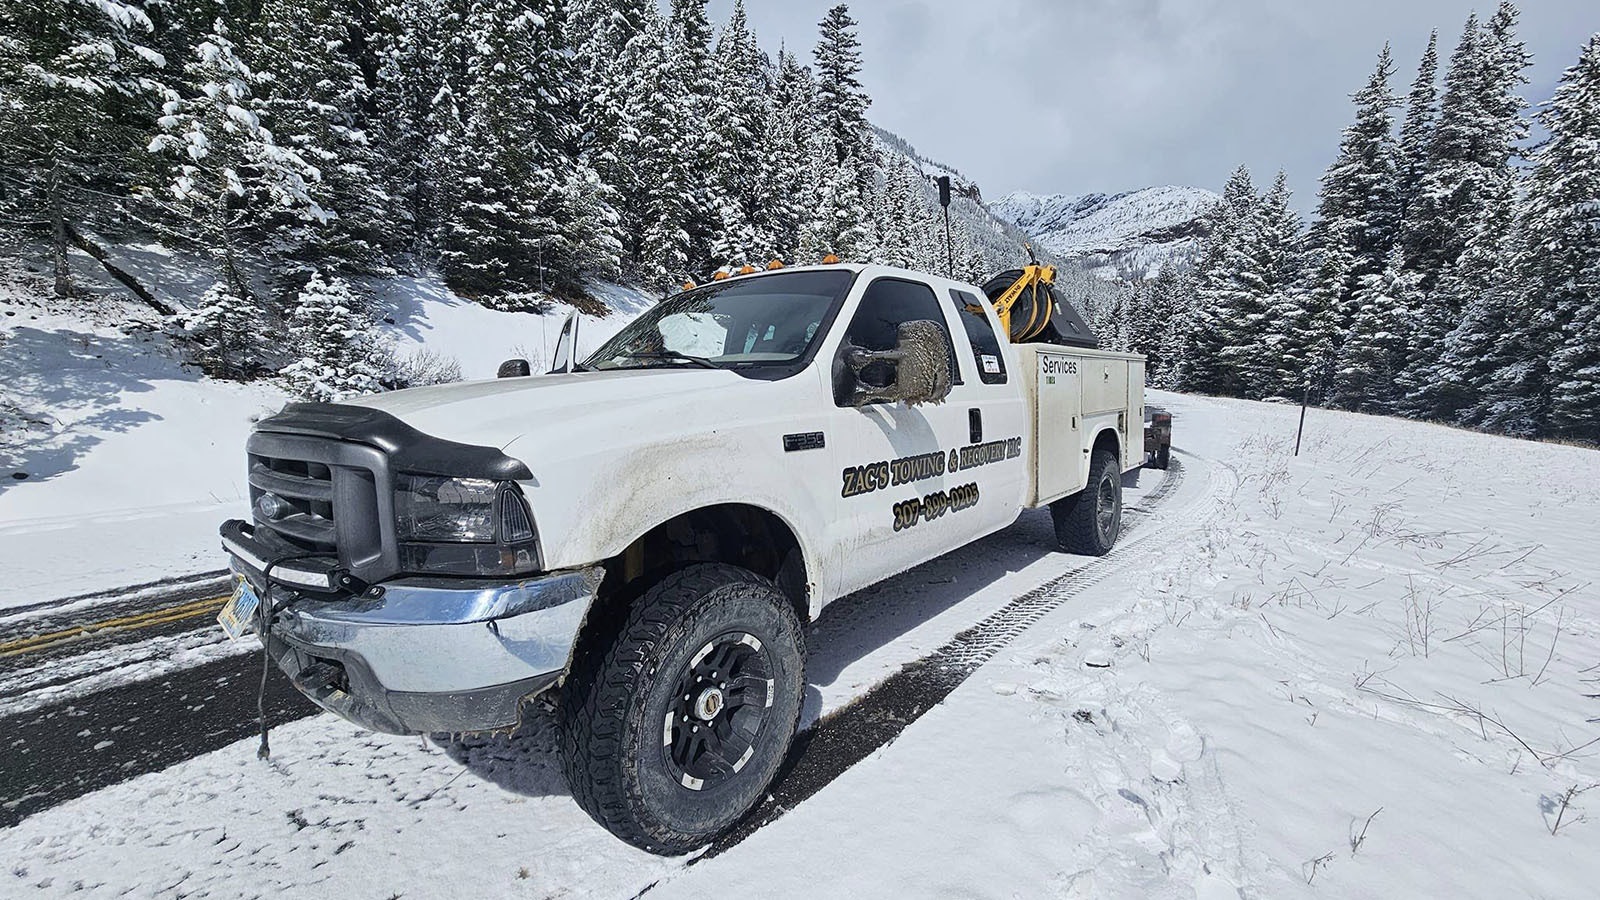 Zac's Towing and Recovery often pulls out stuck vehicles in and around Yellowstone during the winter season.